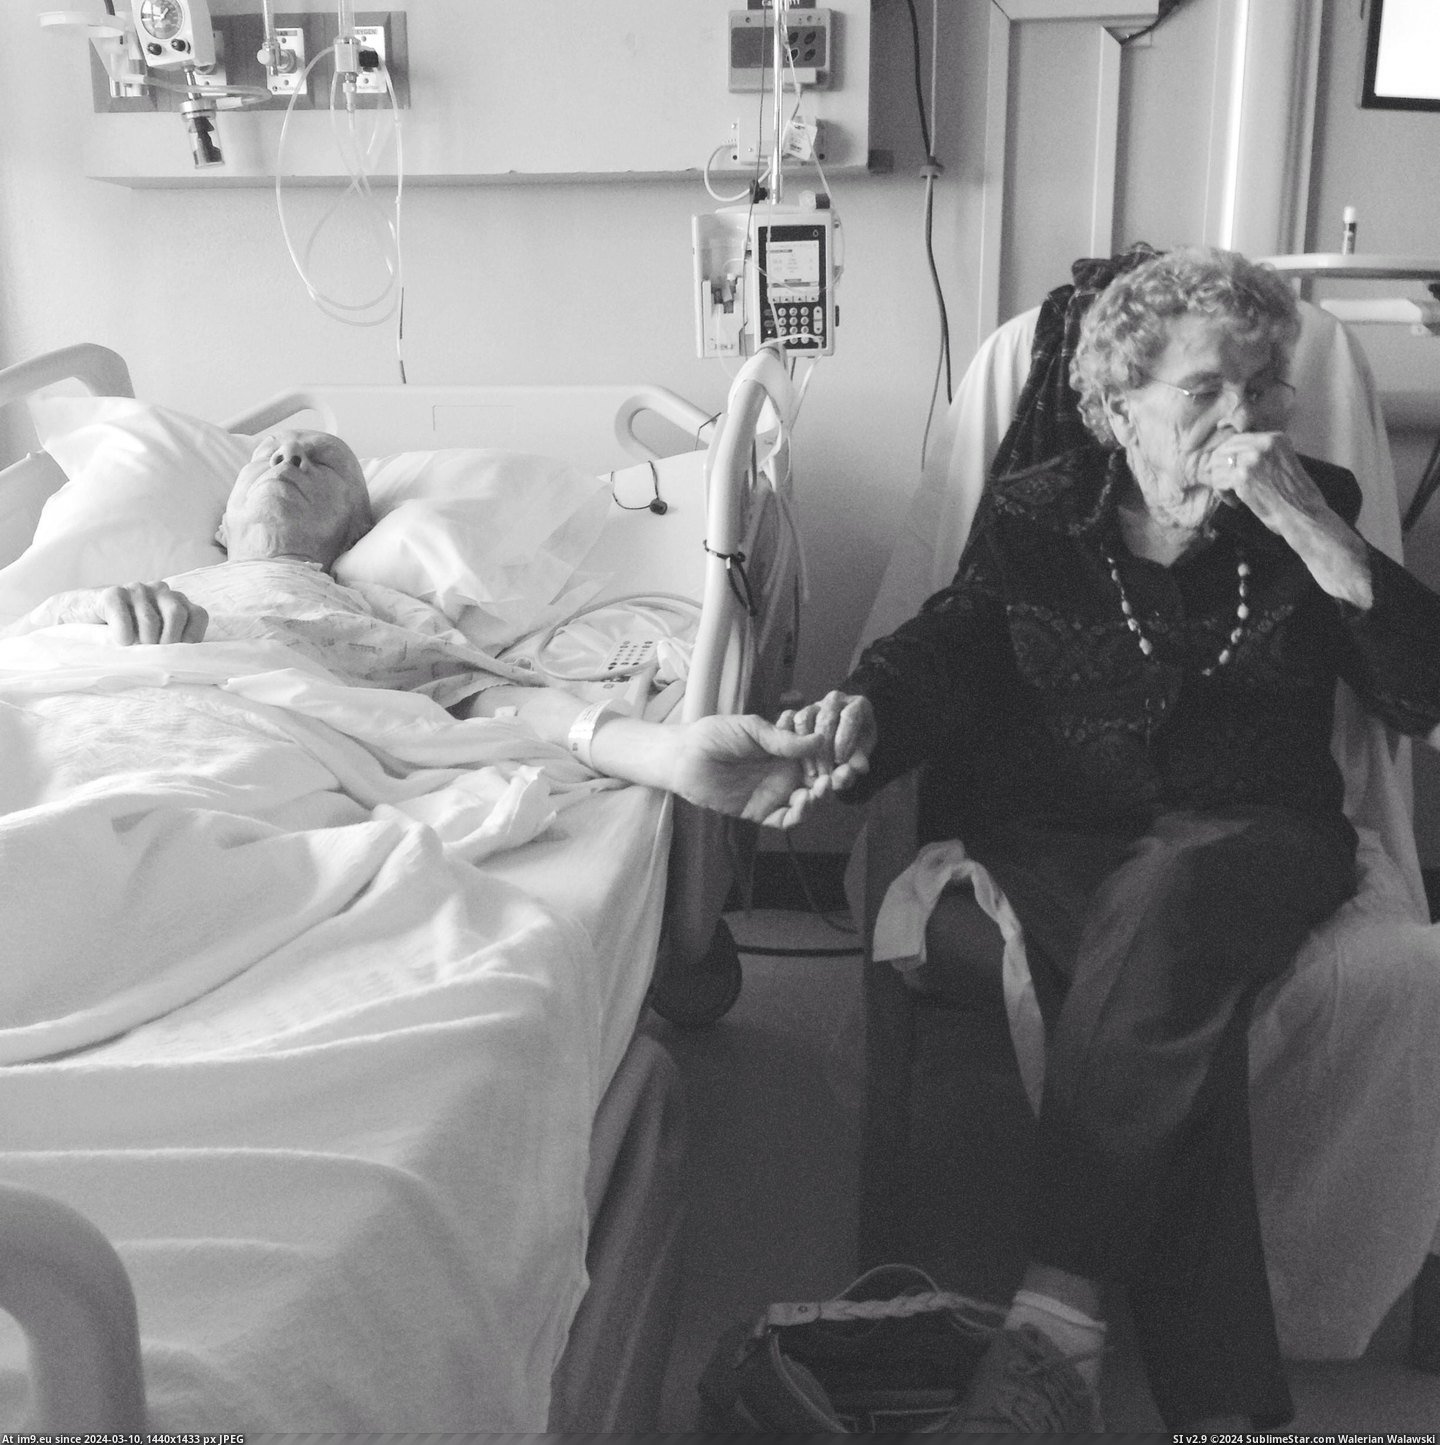 #Year #Old #Beautiful #Dying #Grandmother #Hospit #Caught #Moment #Grandfather [Pics] My 91-year-old grandfather is dying. Caught this beautiful moment between he and my 92-year-old grandmother in the hospit Pic. (Image of album My r/PICS favs))